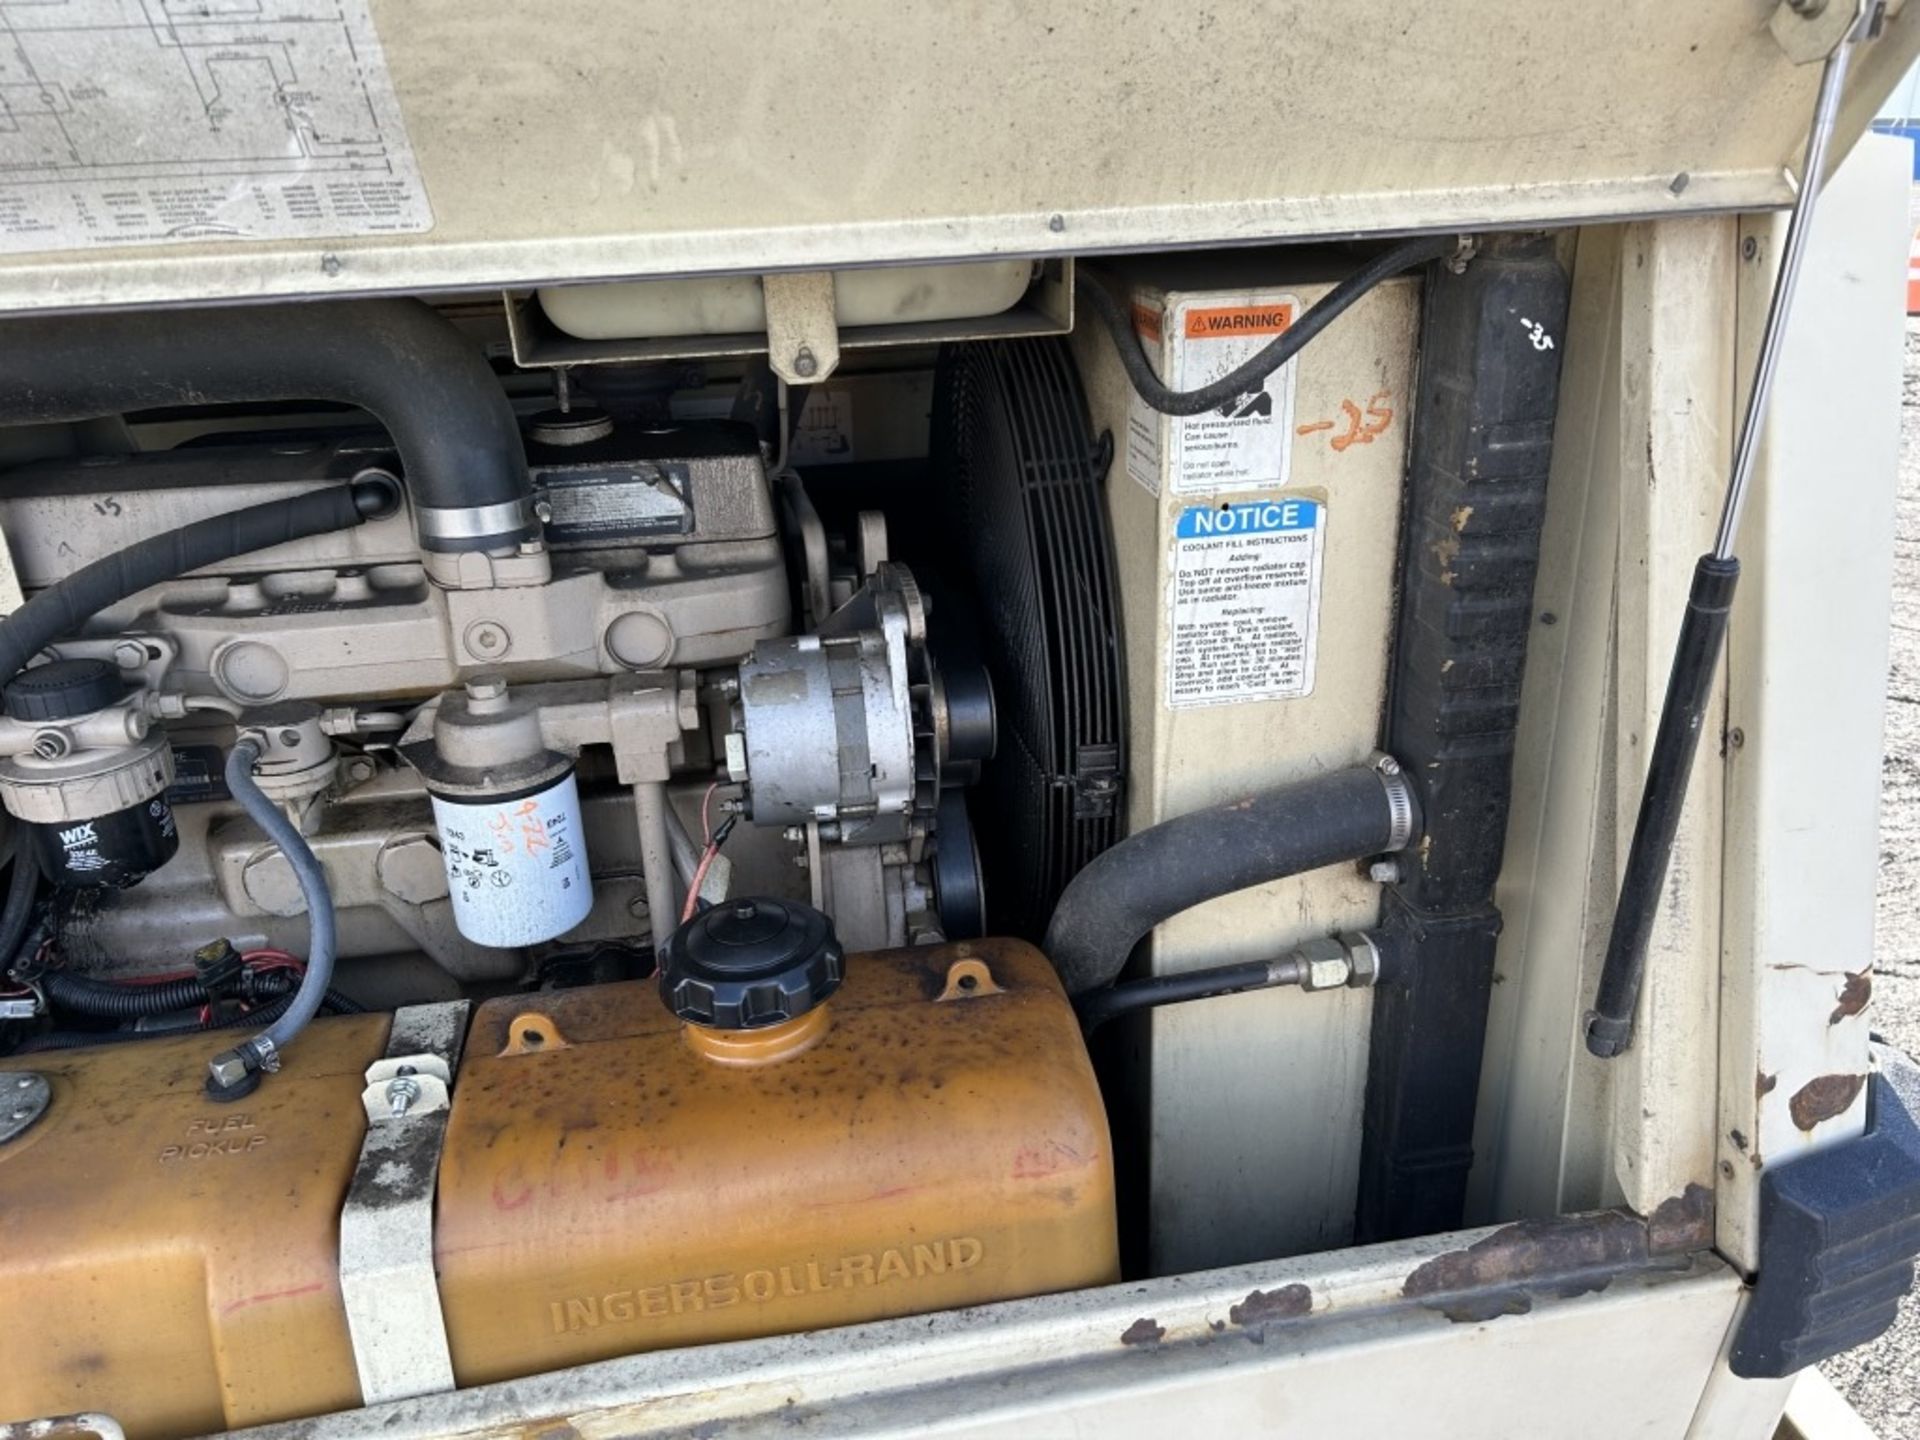 1999 Ingersoll-Rand 185 Towable Air Compressor - Image 18 of 29